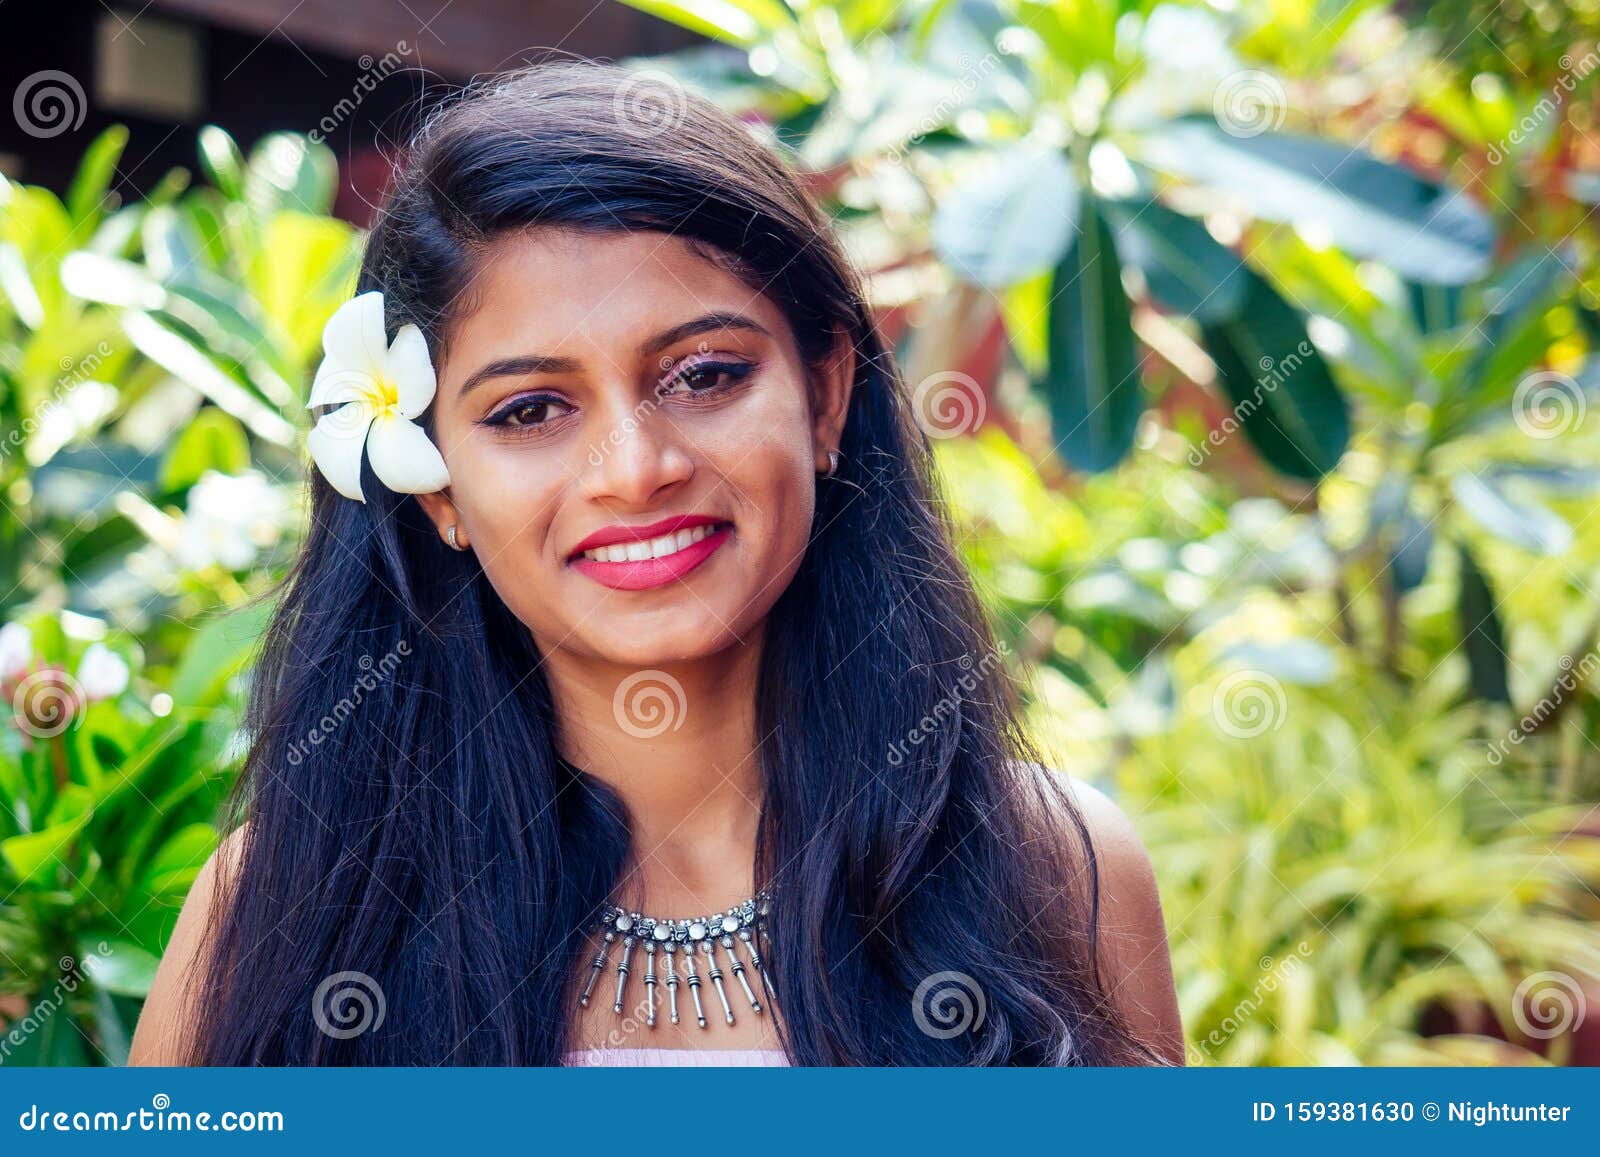 Black nude indian girls Beautiful Young Indian Girl Black Skin Nude Photos Free Royalty Free Stock Photos From Dreamstime